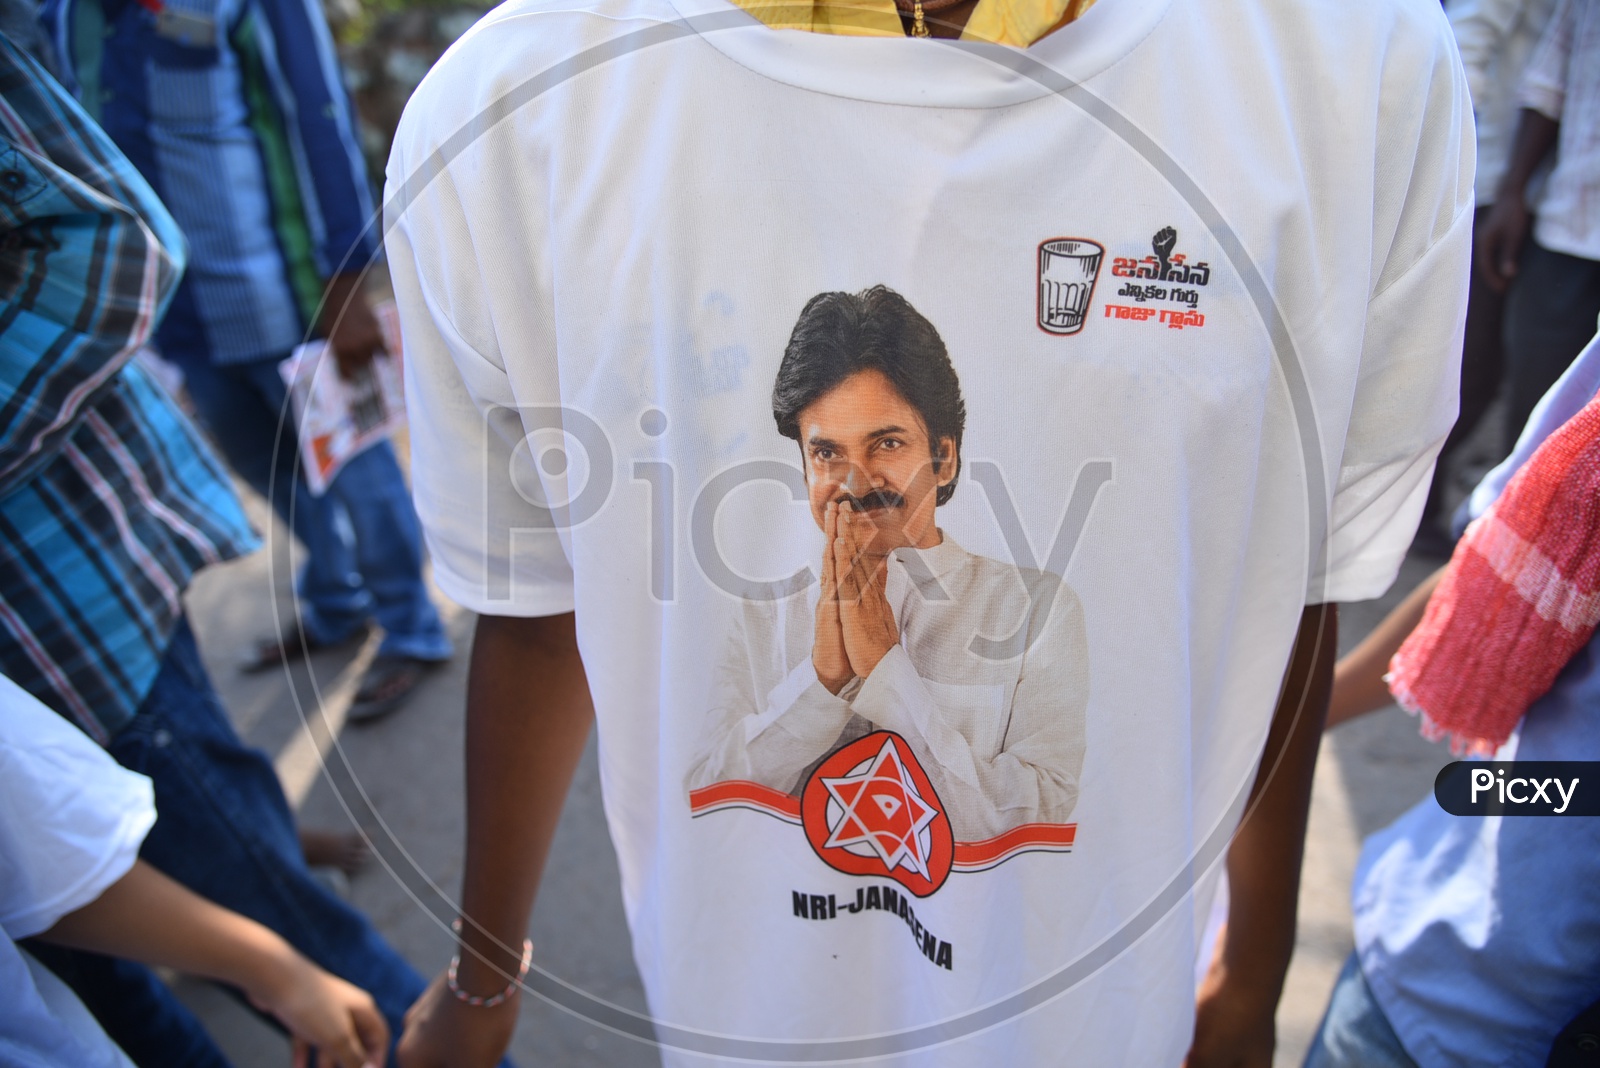 Janasena Party Supporters Wearing Tshirts During Election Campaign Rally